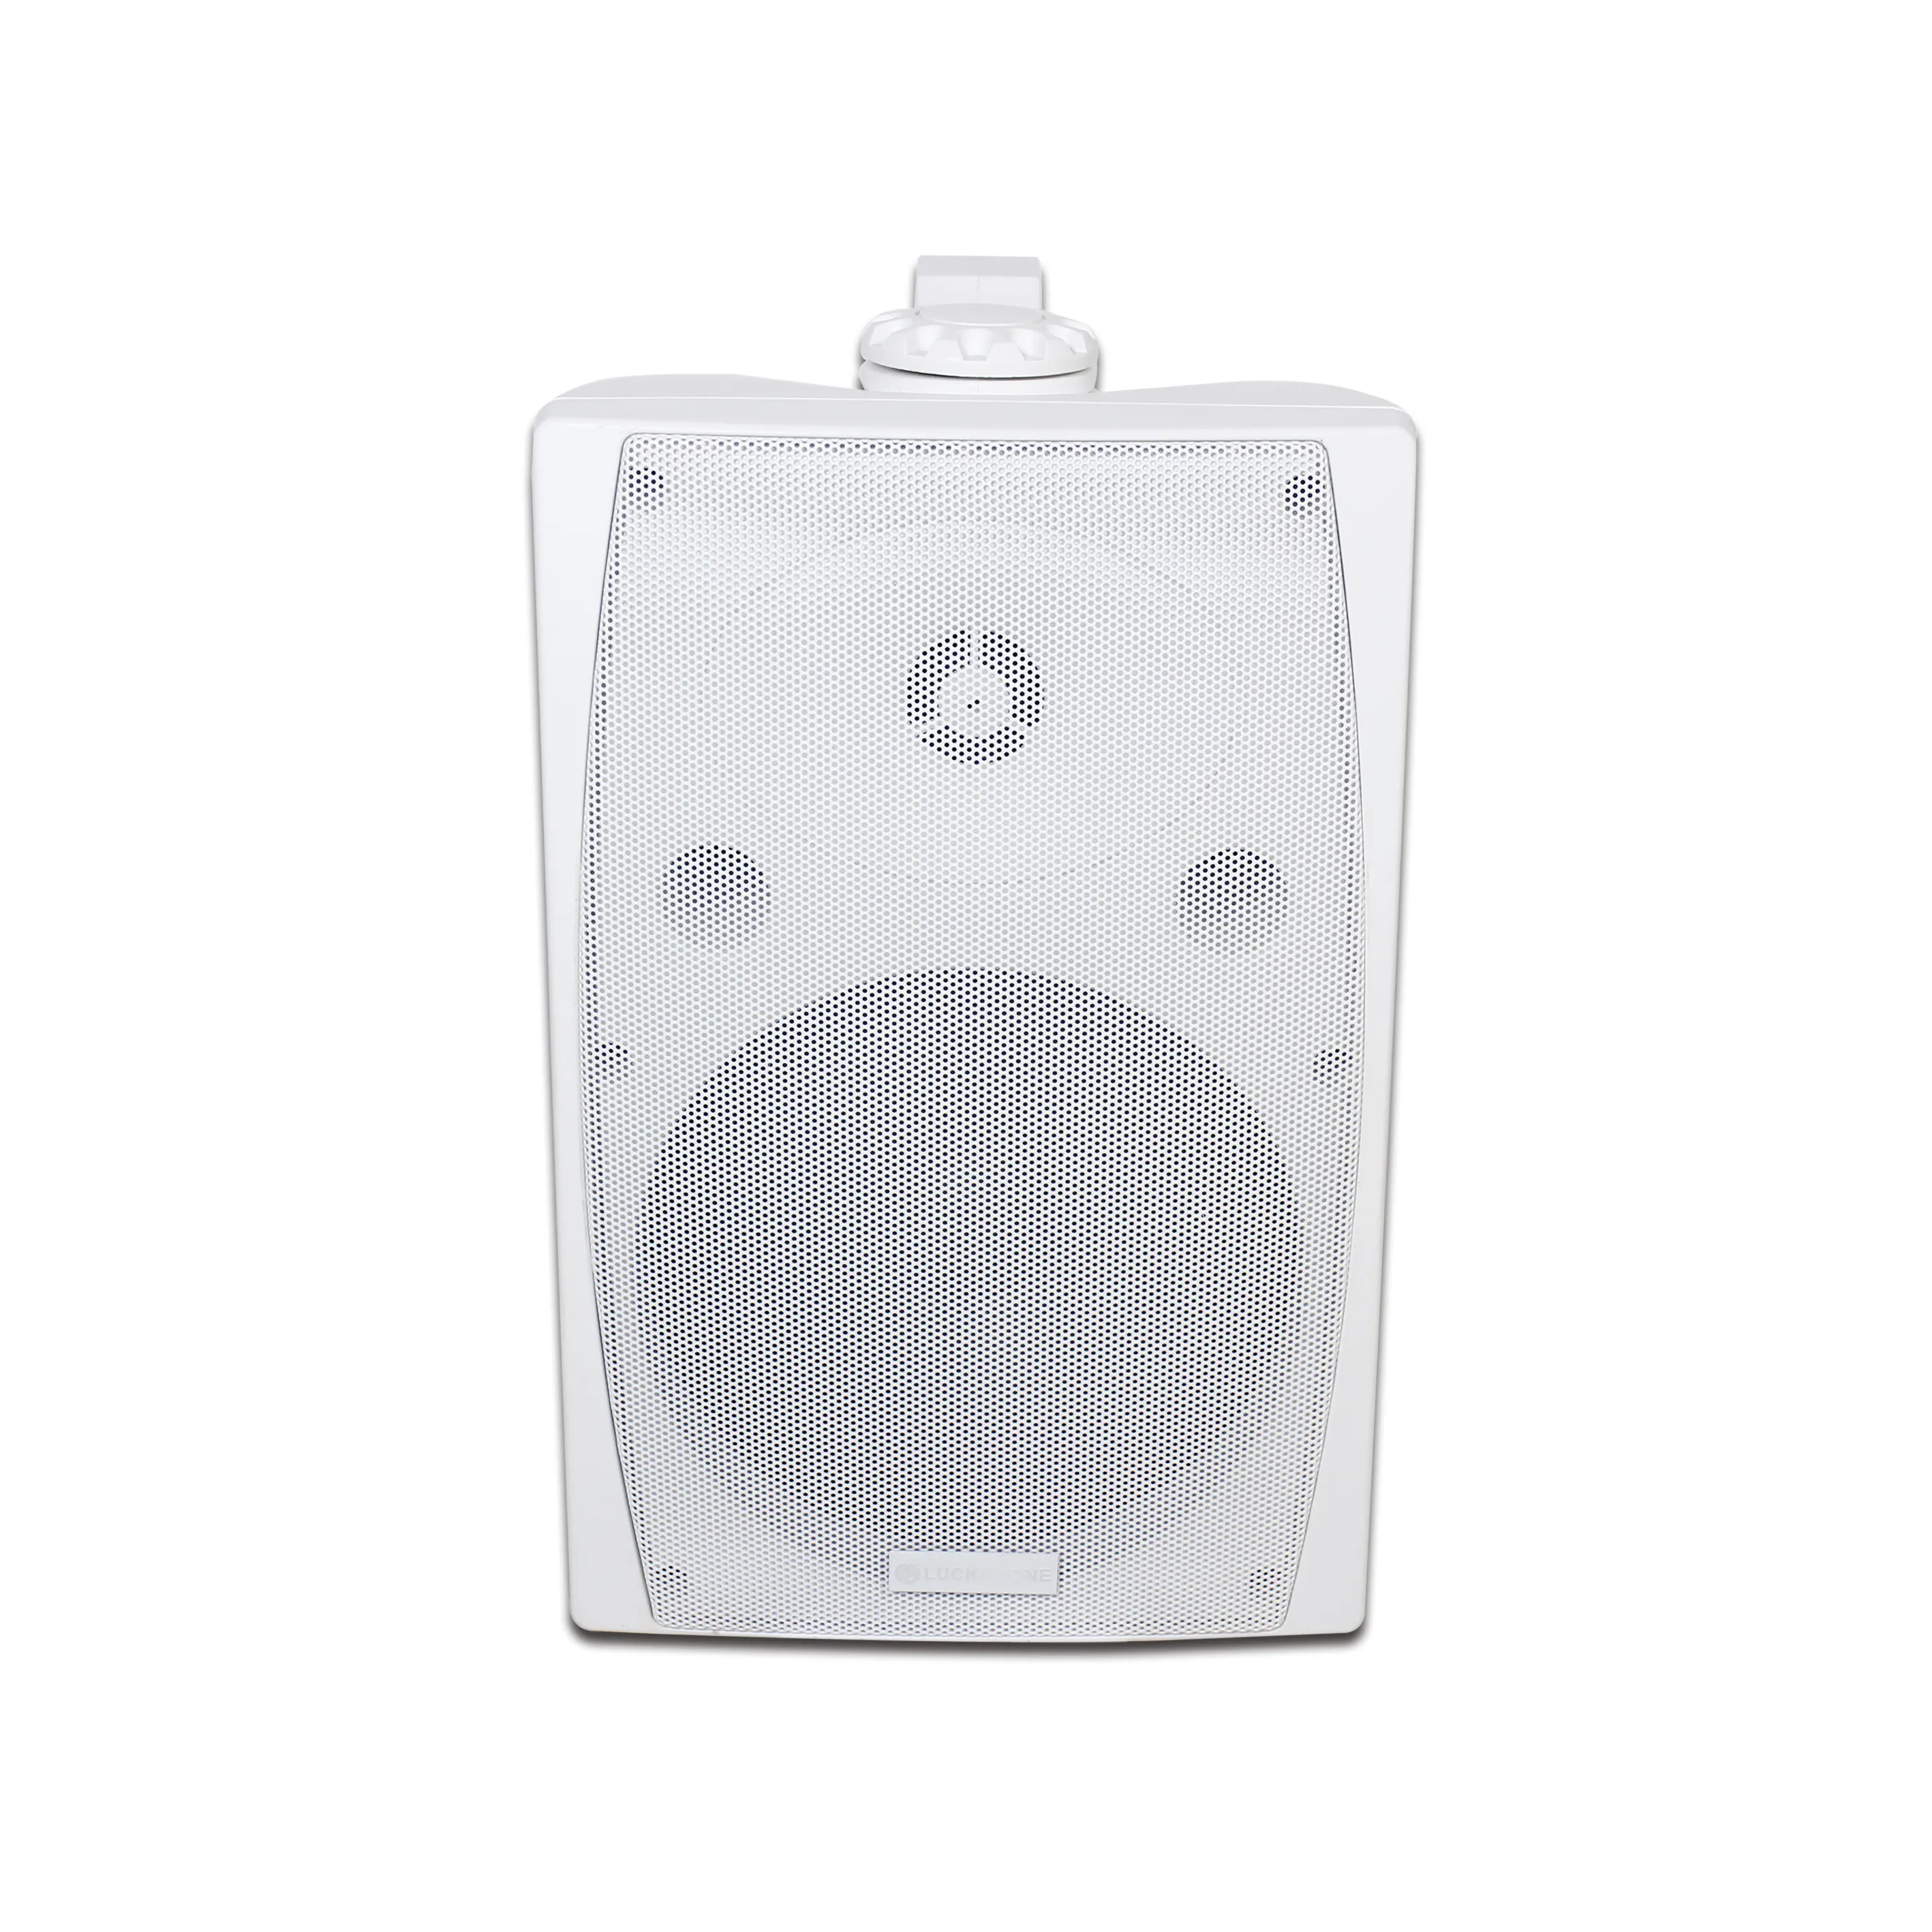 High Quality White Color 20W 6-Inch ABS Material Altavoz Wall Mounted Speaker with Bluetooth 5.0 and 3.5mm Jack Audio Input